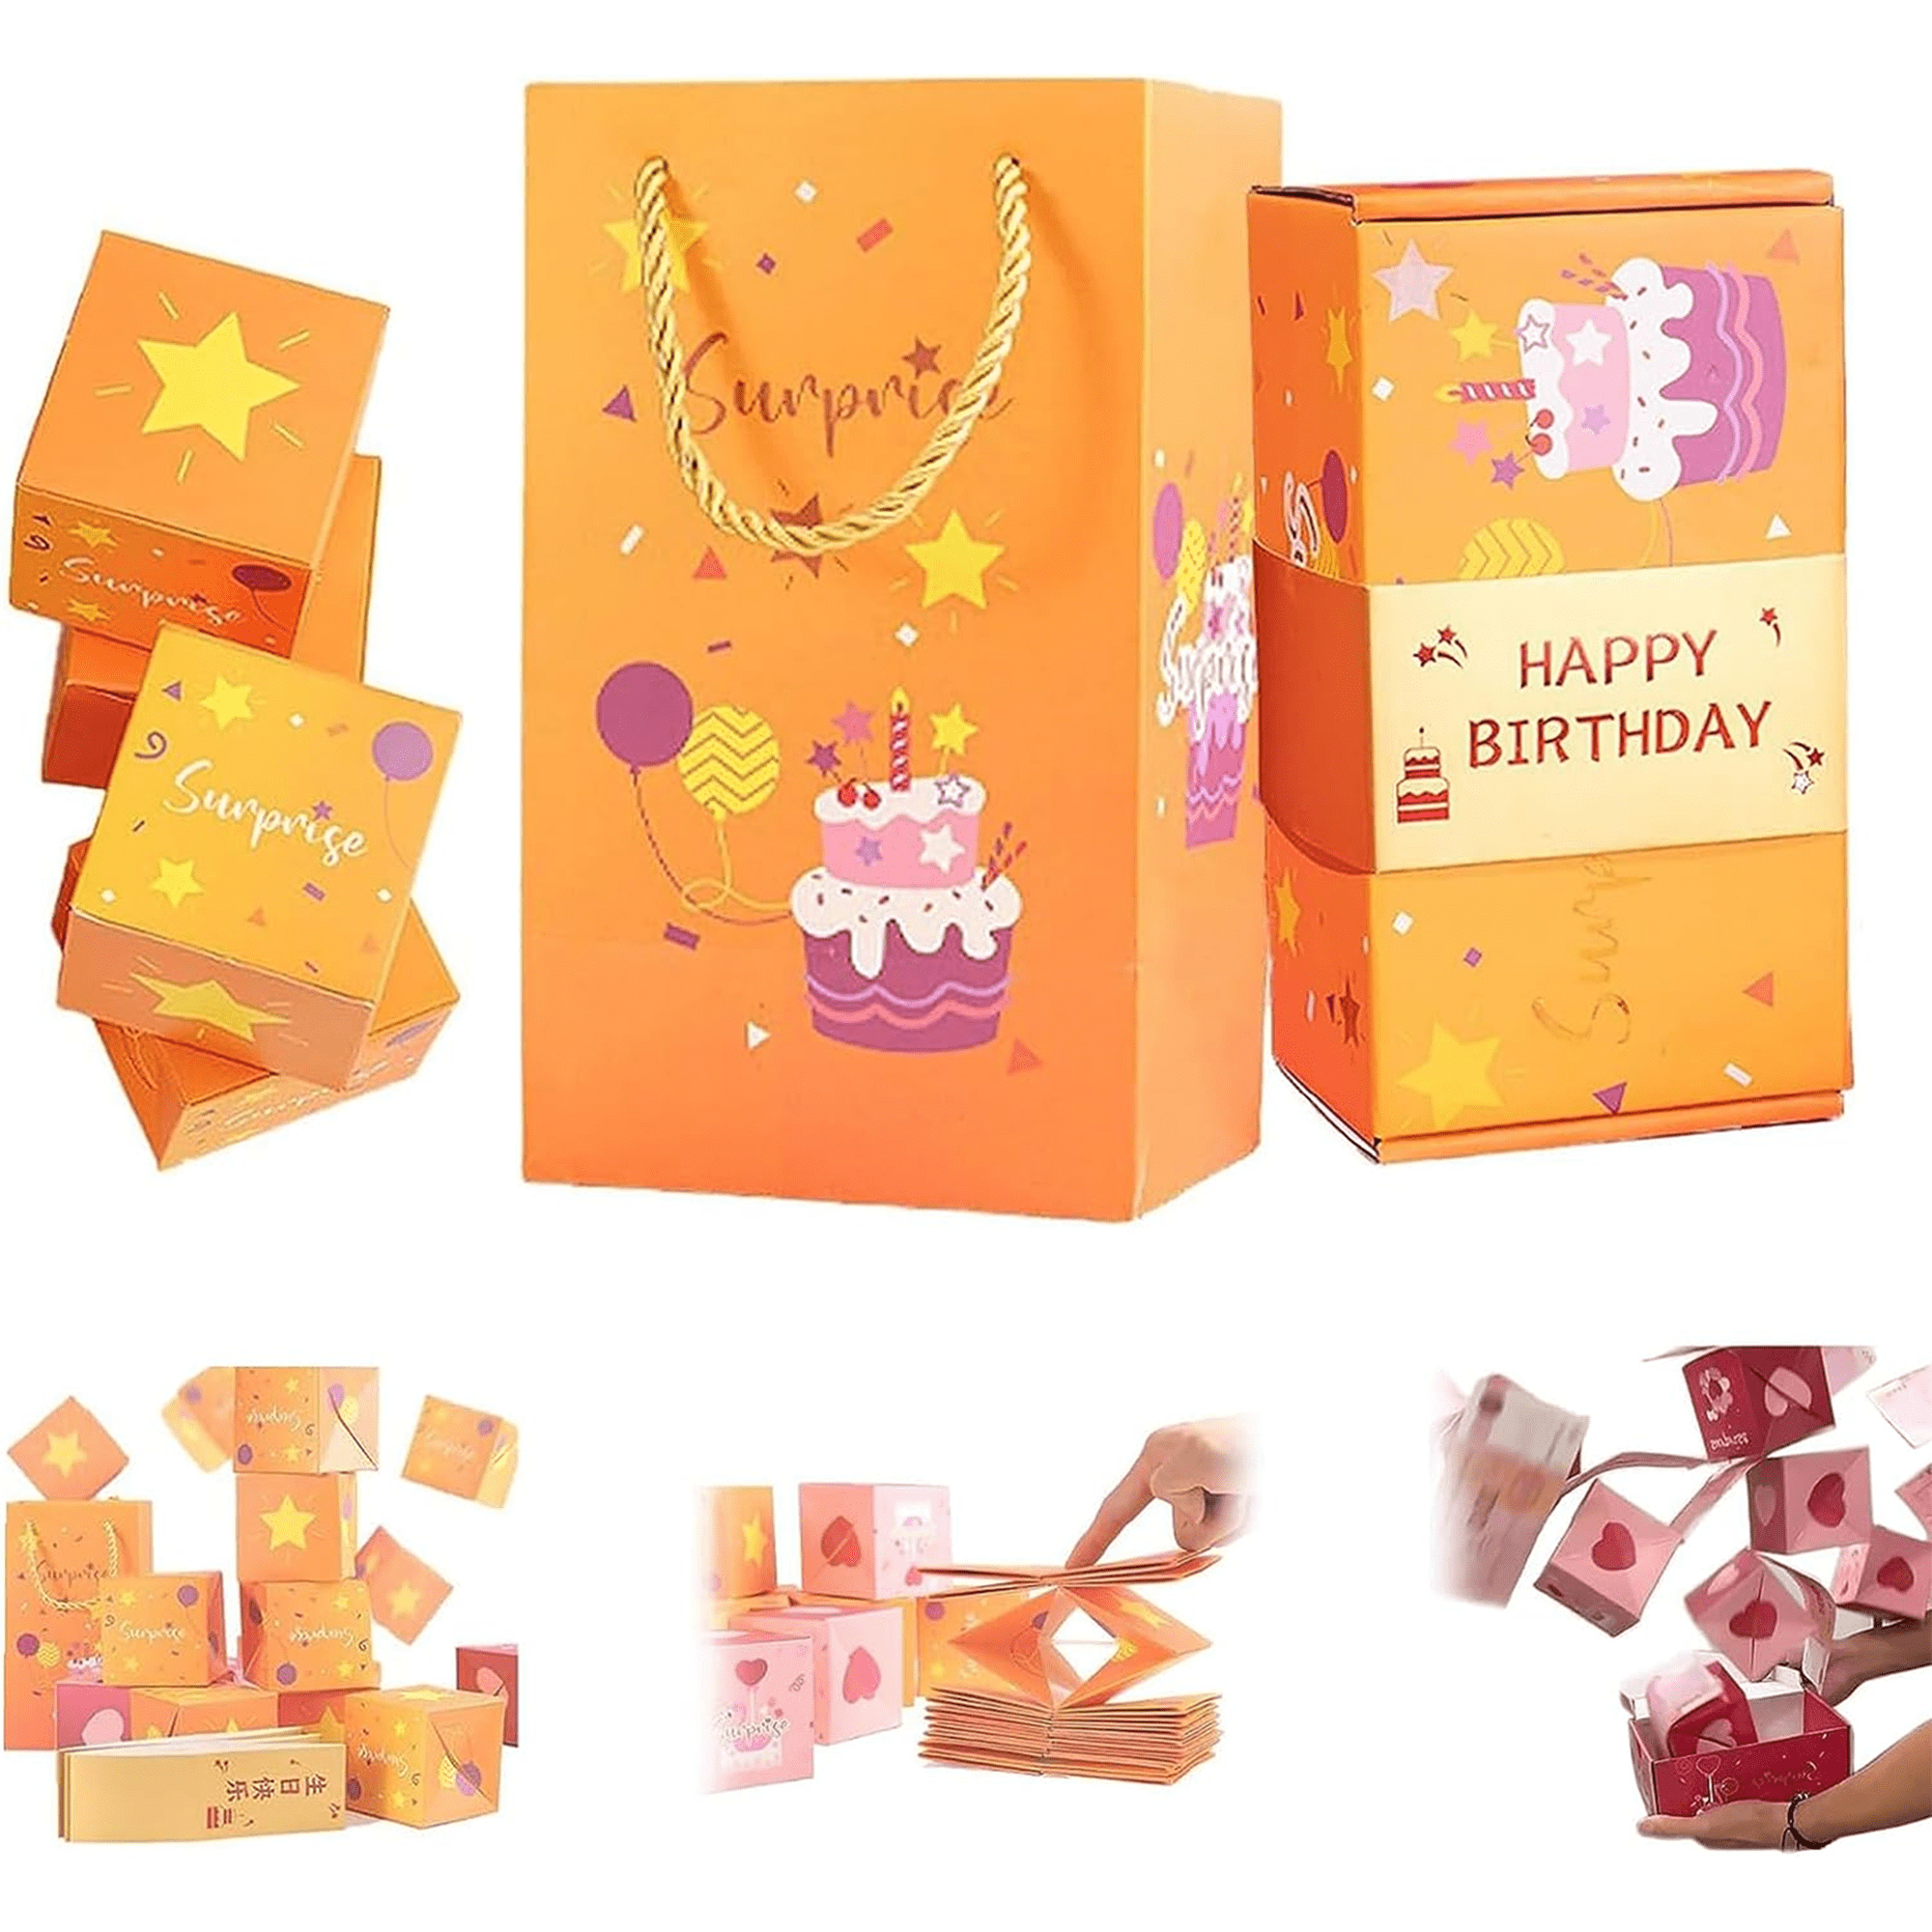 KQJQS Surprise Gift Box Explosion - Merry Christmas Surprise Gift  Boxes,Gift Box Explosion for Money and Birthday, Pop-Up Explosion Gift Box,  Exploding Pop Up Boxes for Gifts (12 Box Set) 